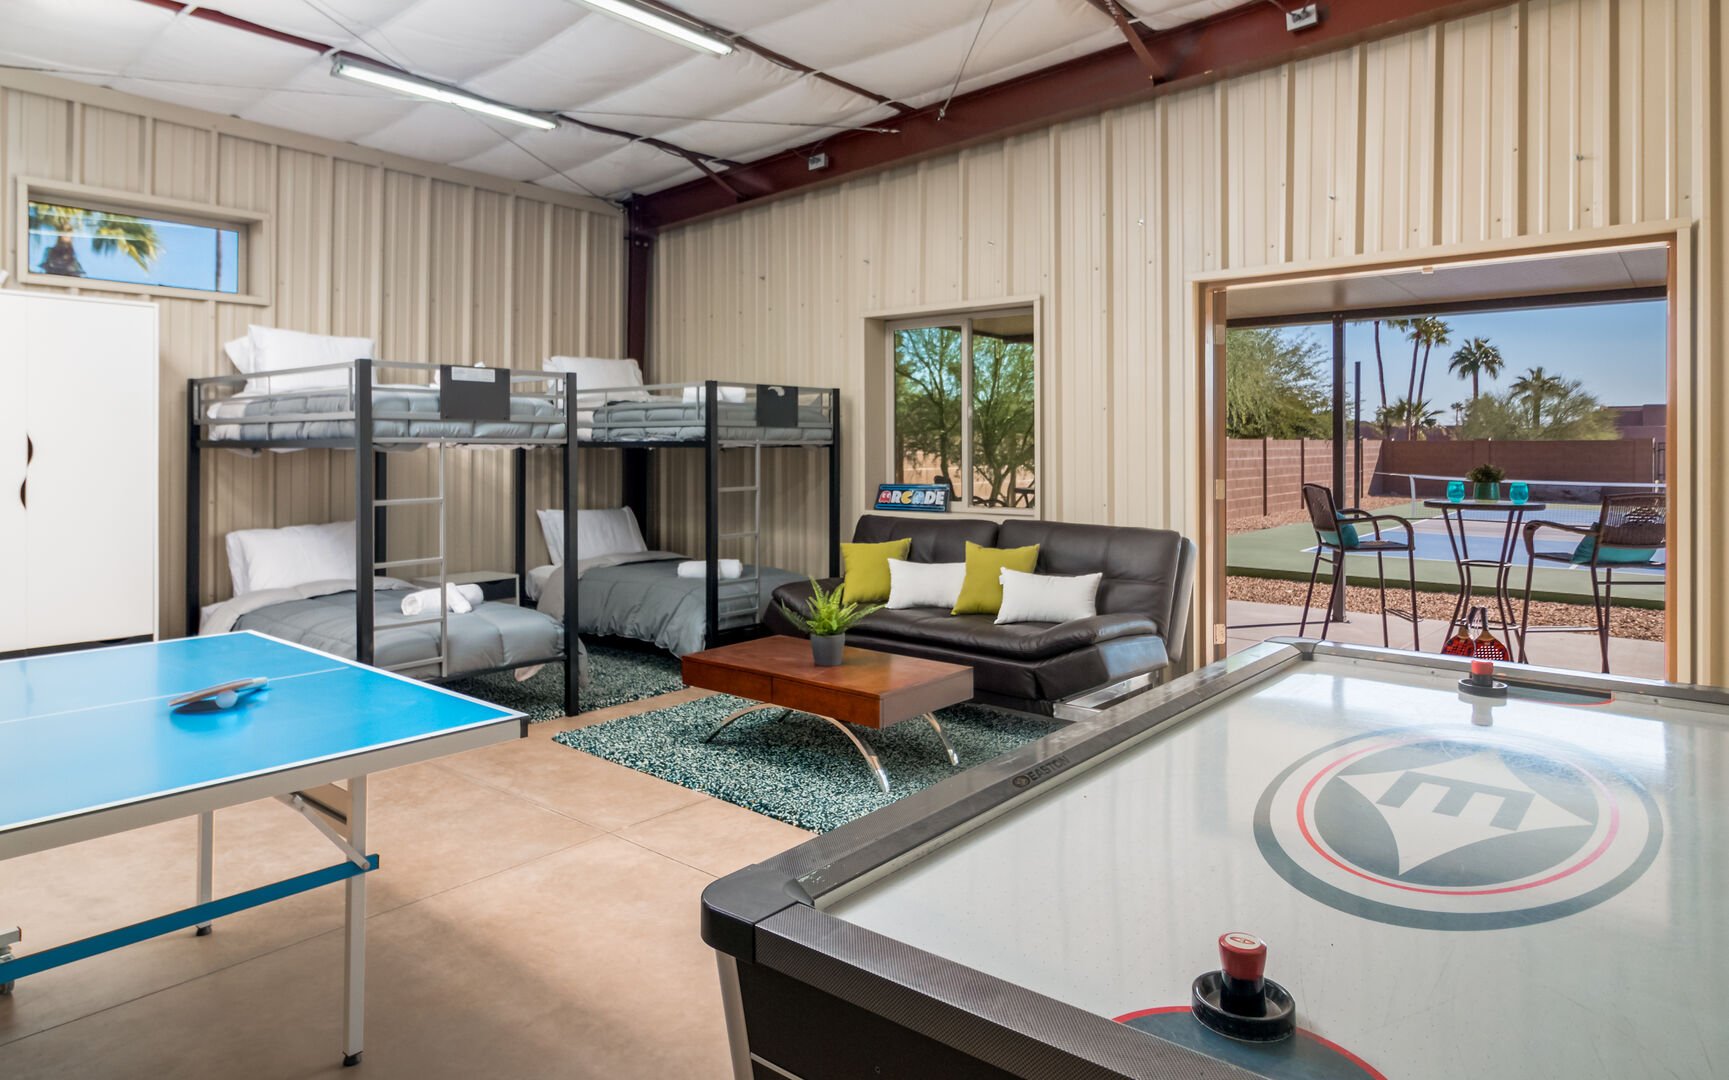 Game Room w/ Air Hockey and Ping Pong, & Pickleball Court in Background